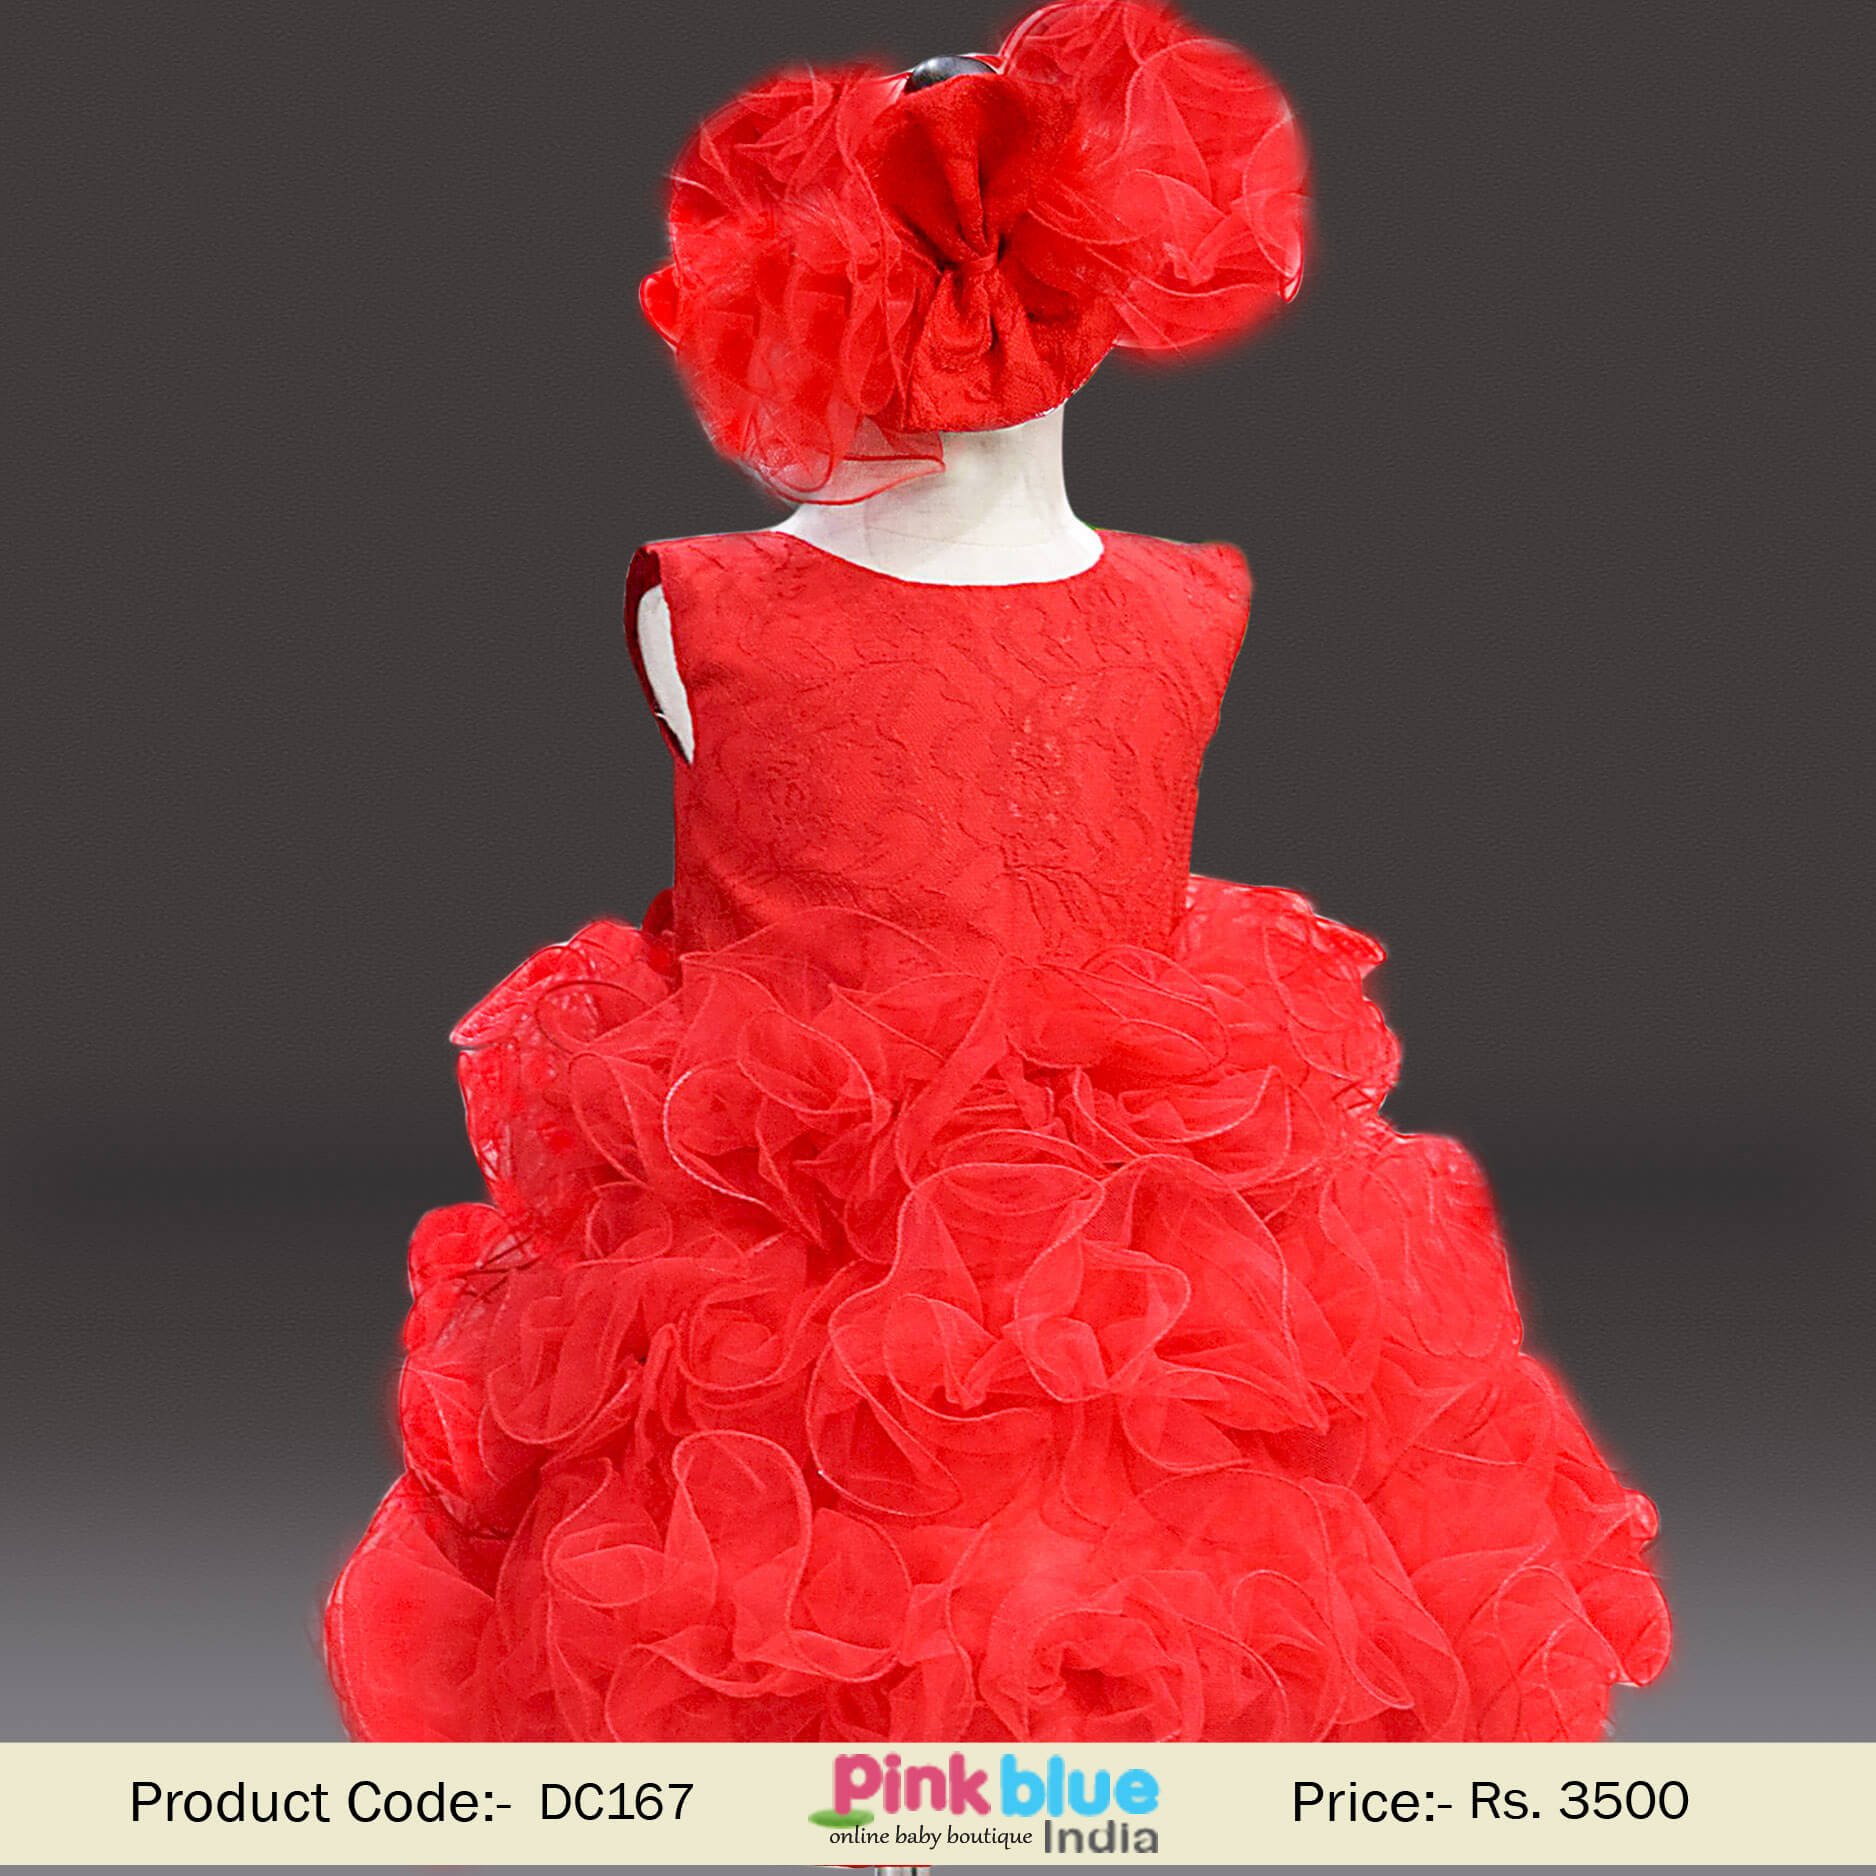 Little Princess Ruffle Birthday Dress, Red Frilly Party Dress for Toddlers